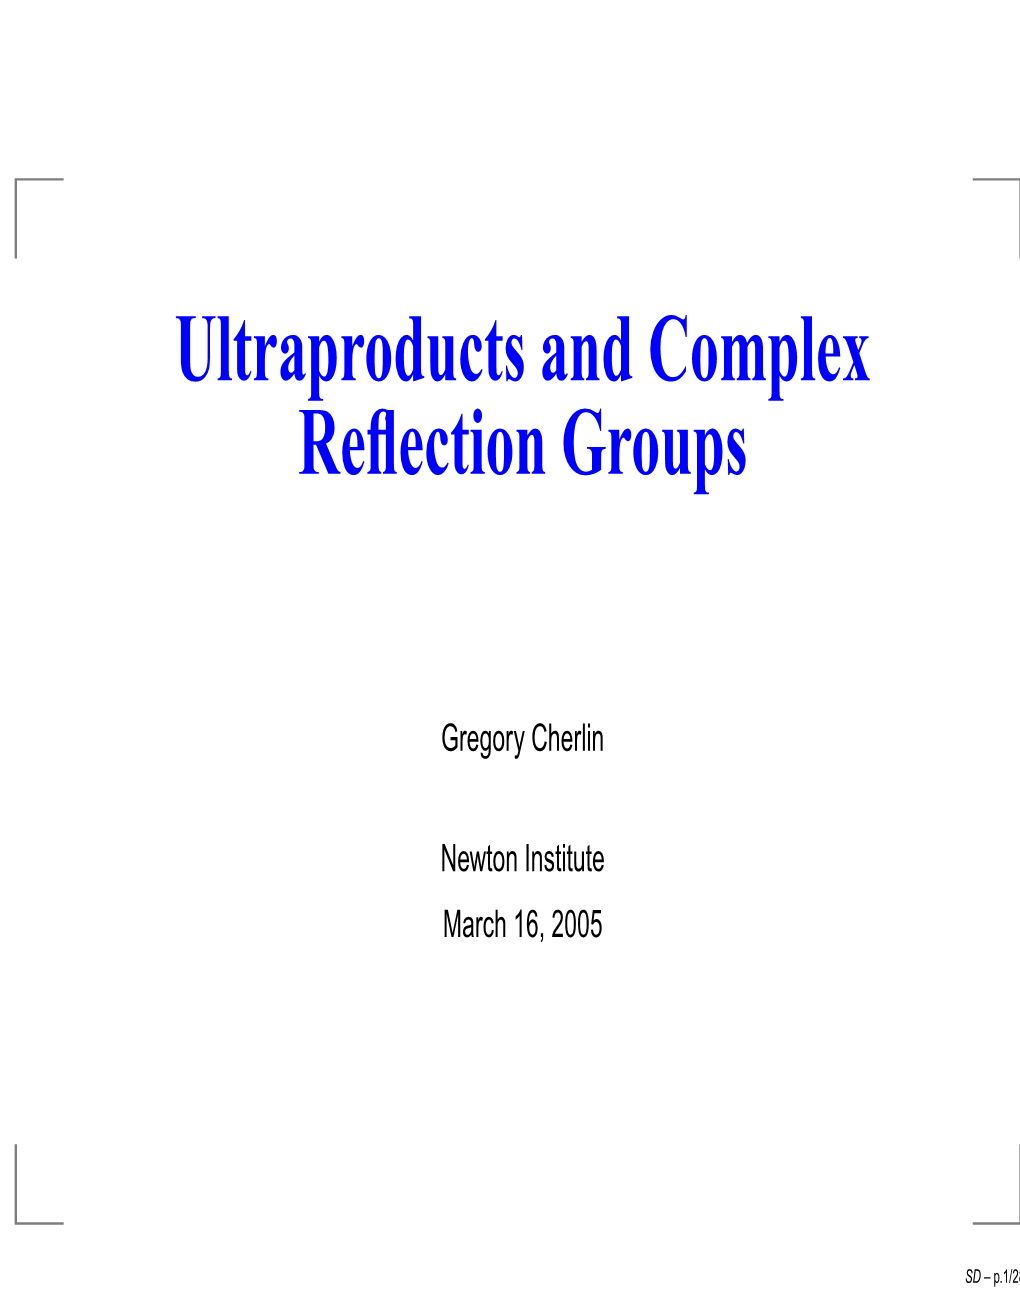 Ultraproducts and Complex Reflection Groups